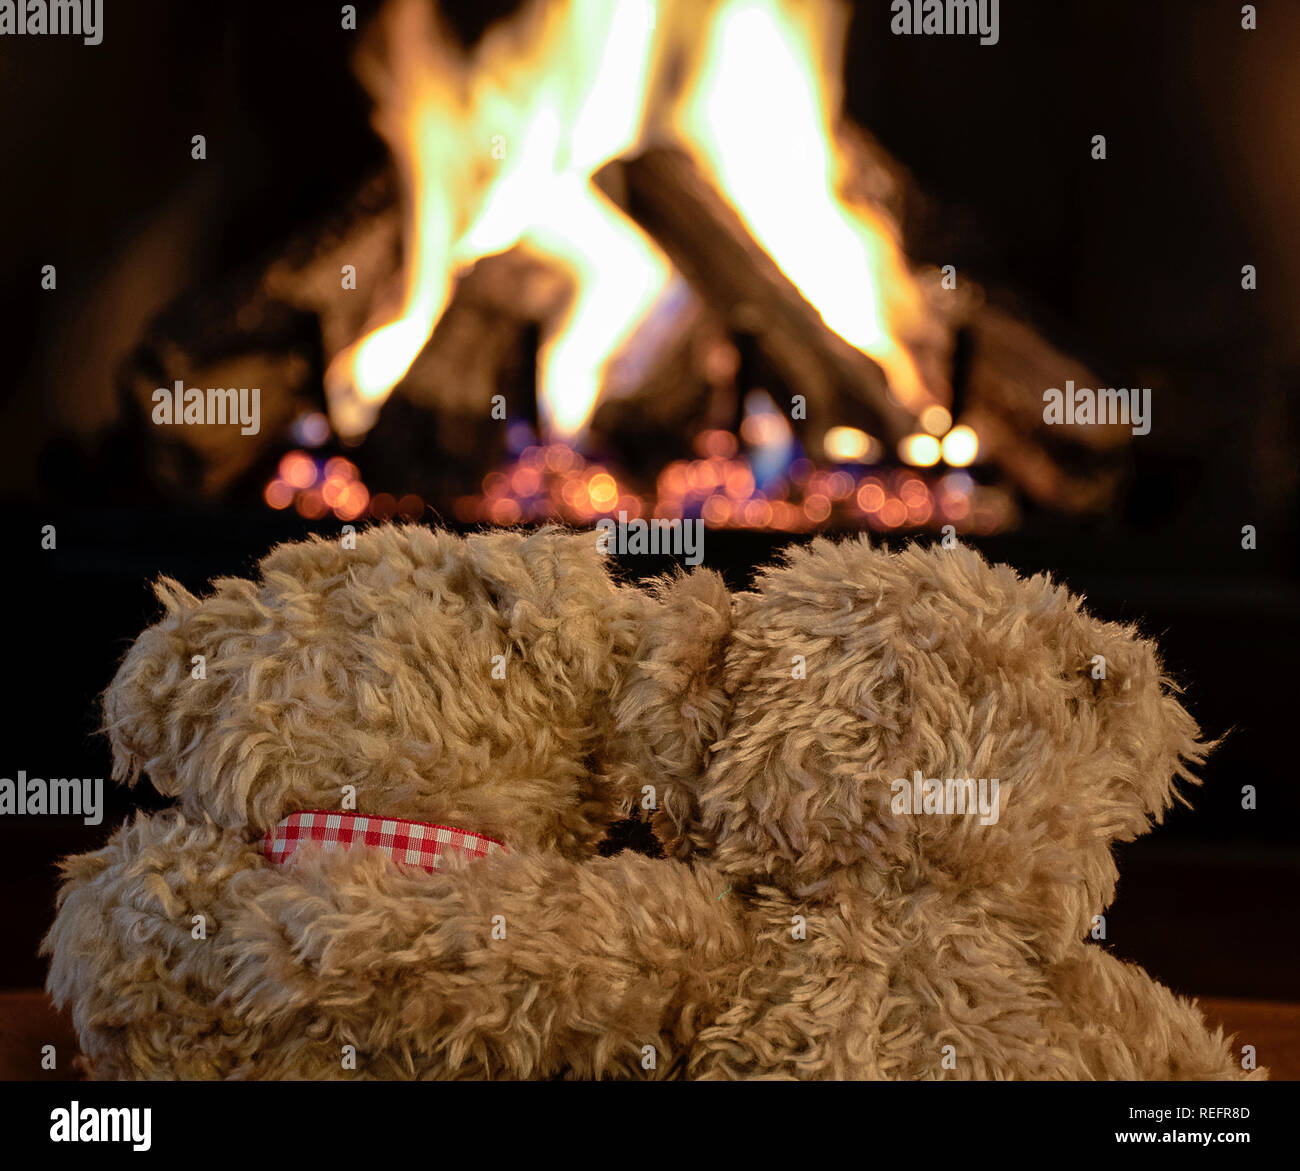 pair of brown teddy bears in front of burning logs in fireplace Stock Photo